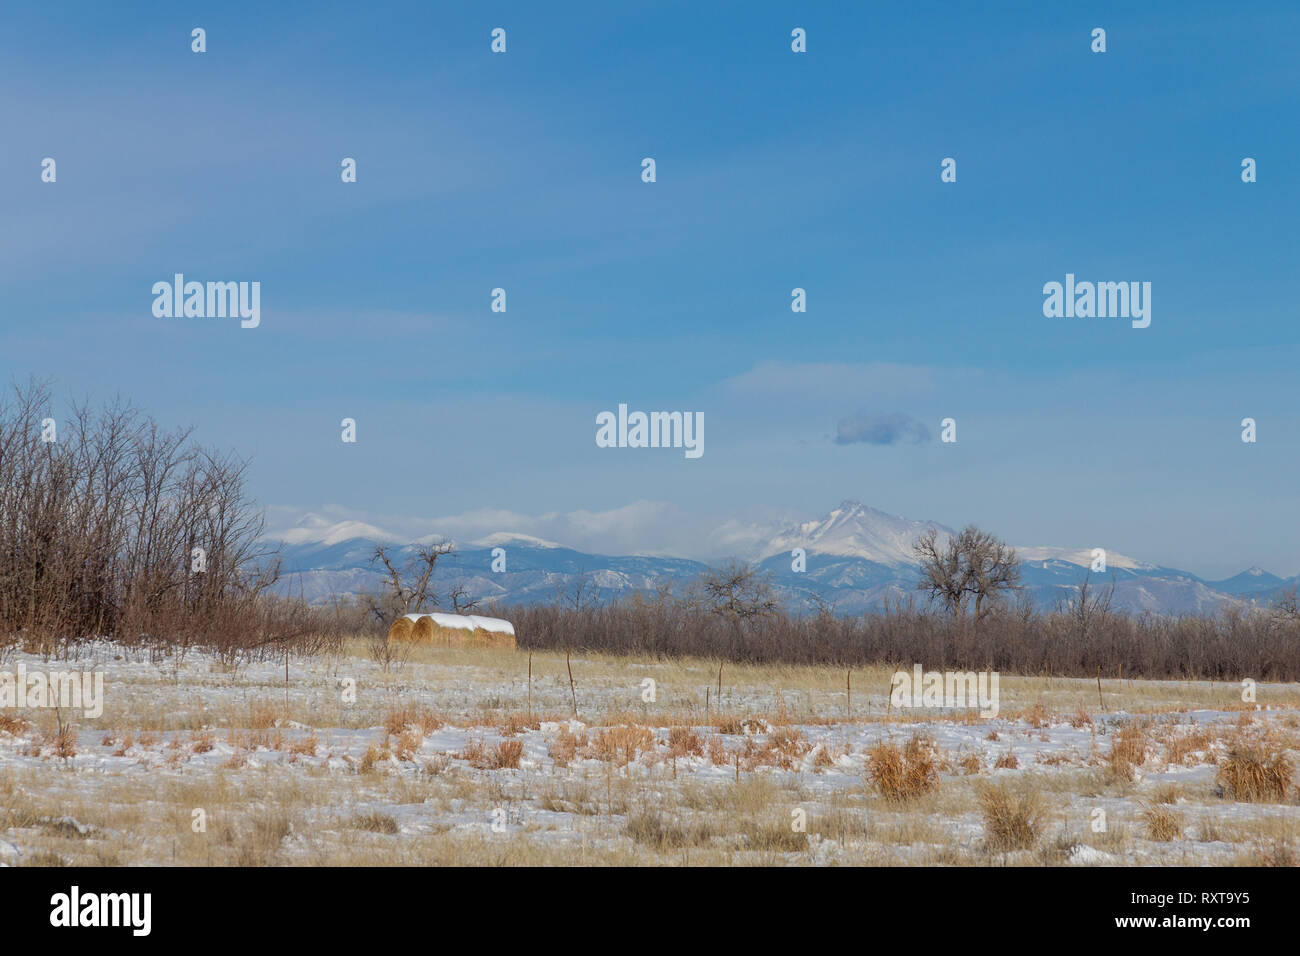 Field and hay bale with Longs Peak in the background, from Rocky Mountain Arsenal, Colorado. Stock Photo